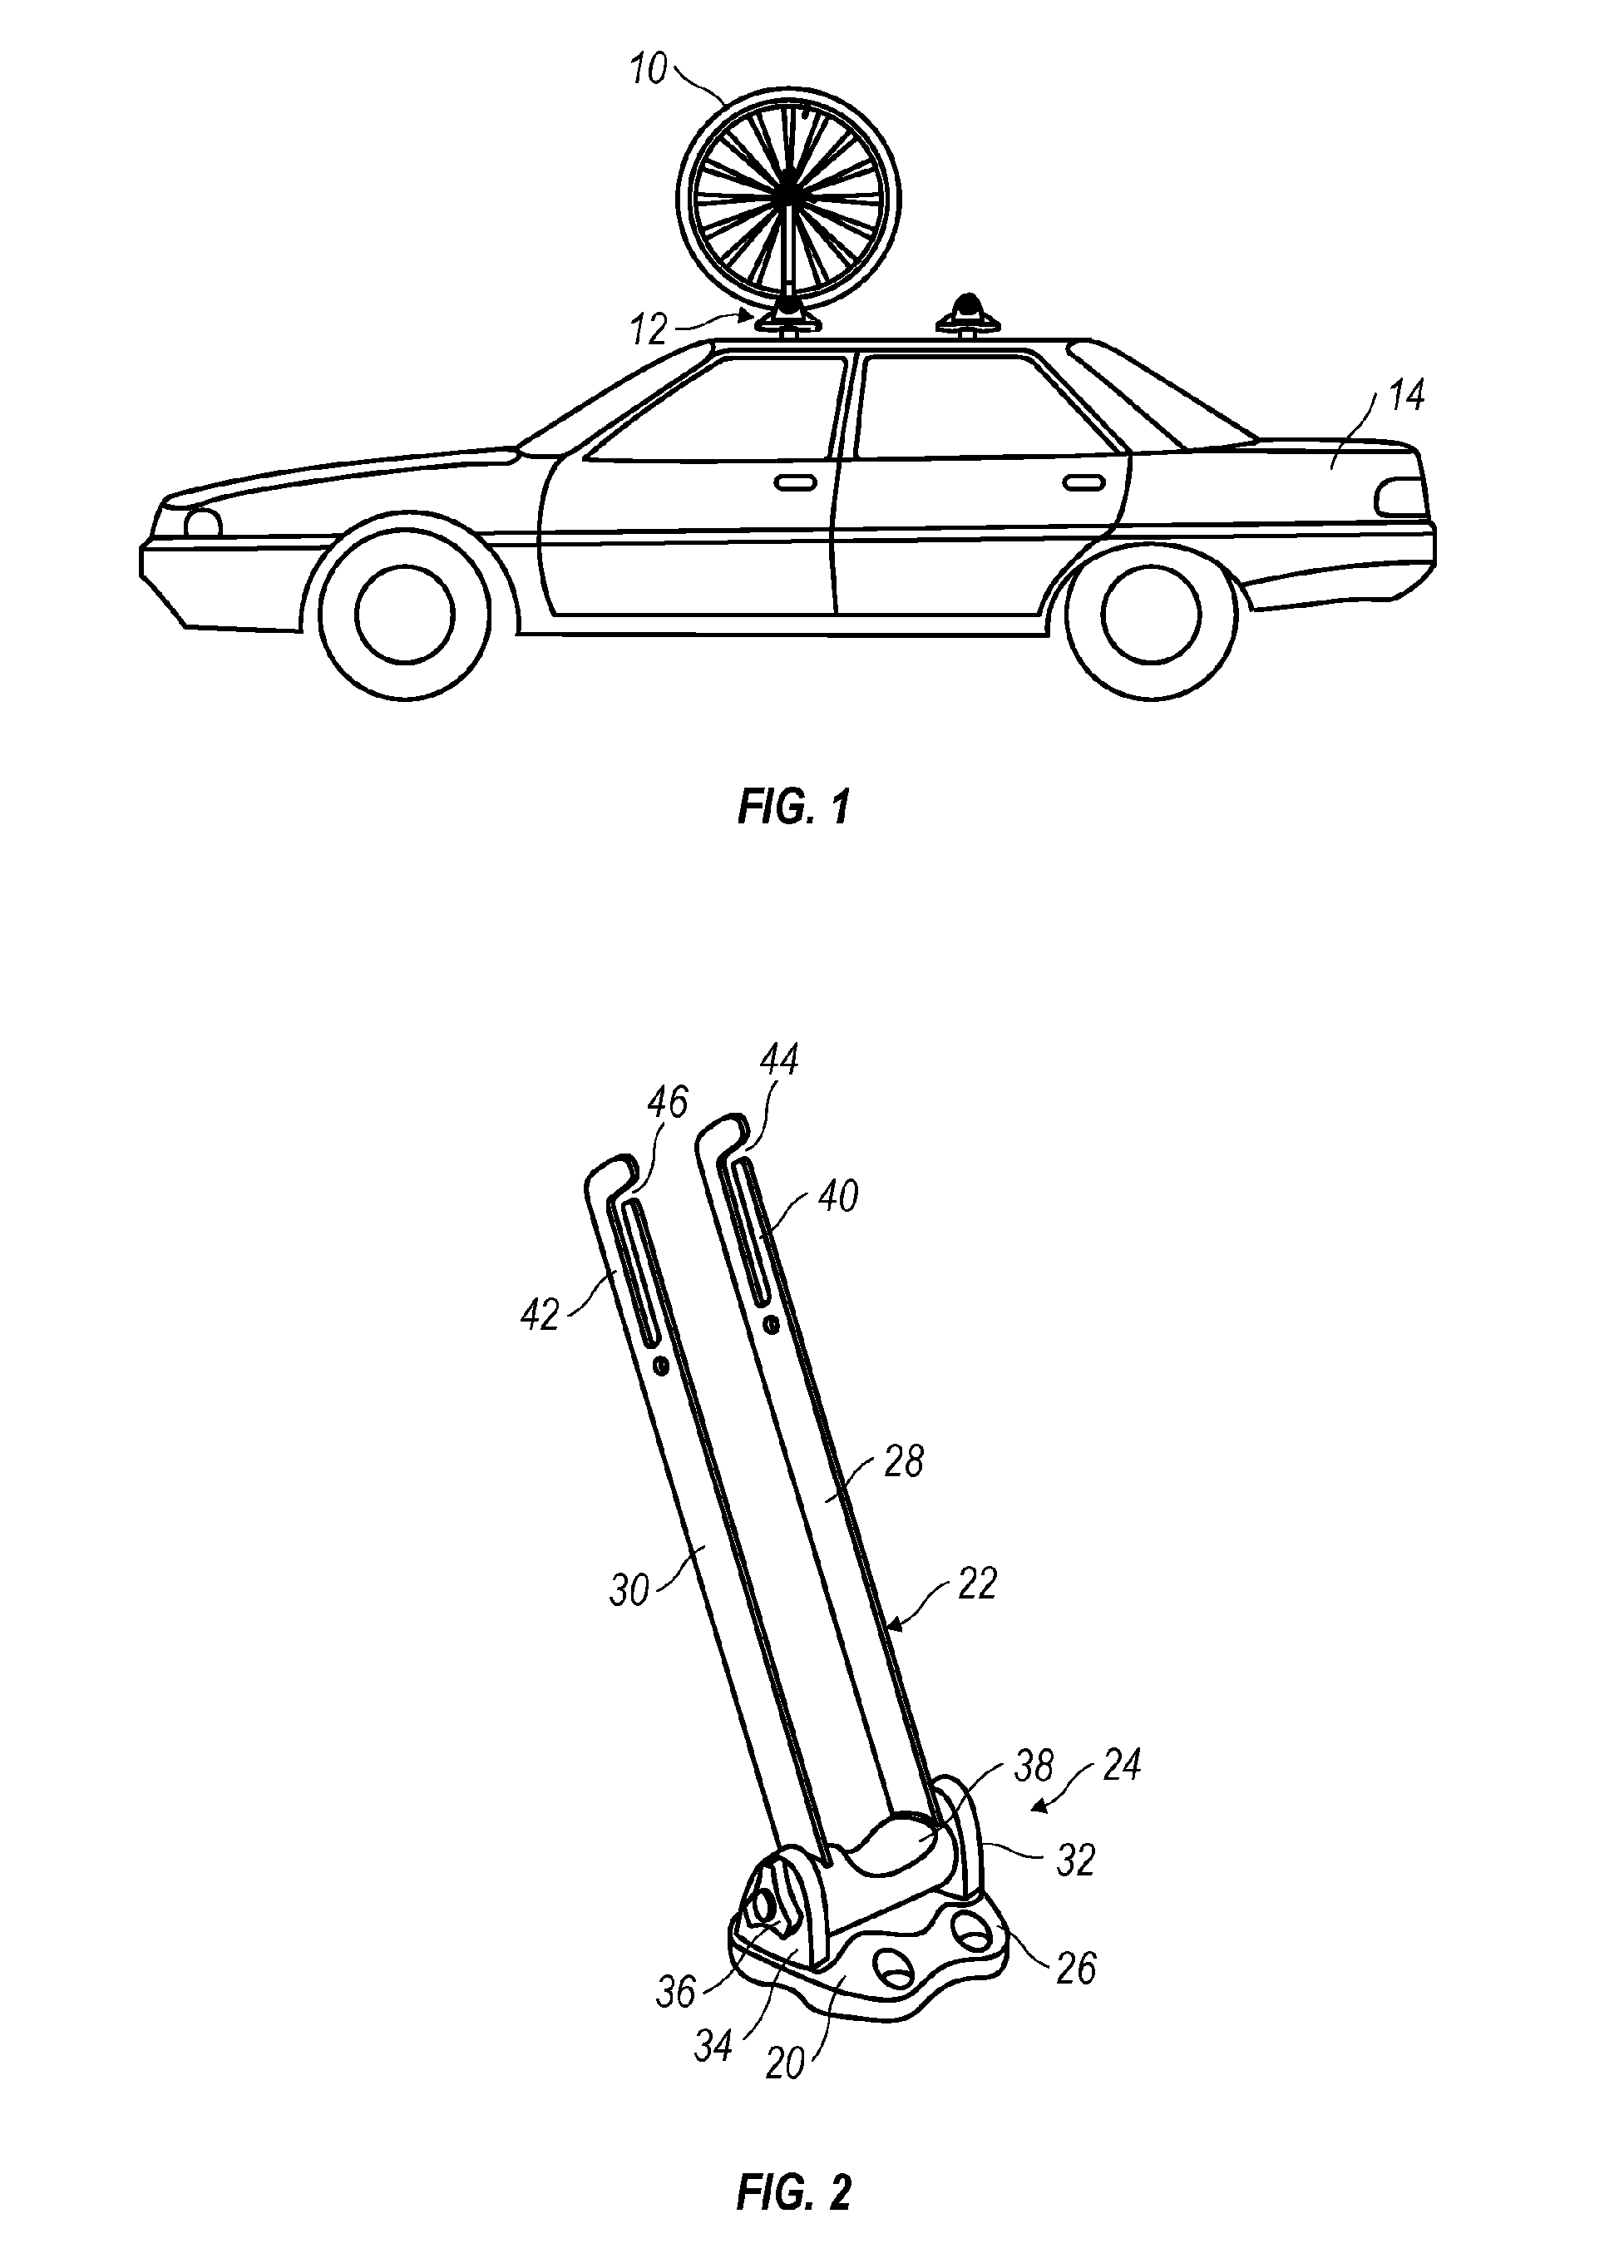 Slottted wheel support mountable on a load carrier